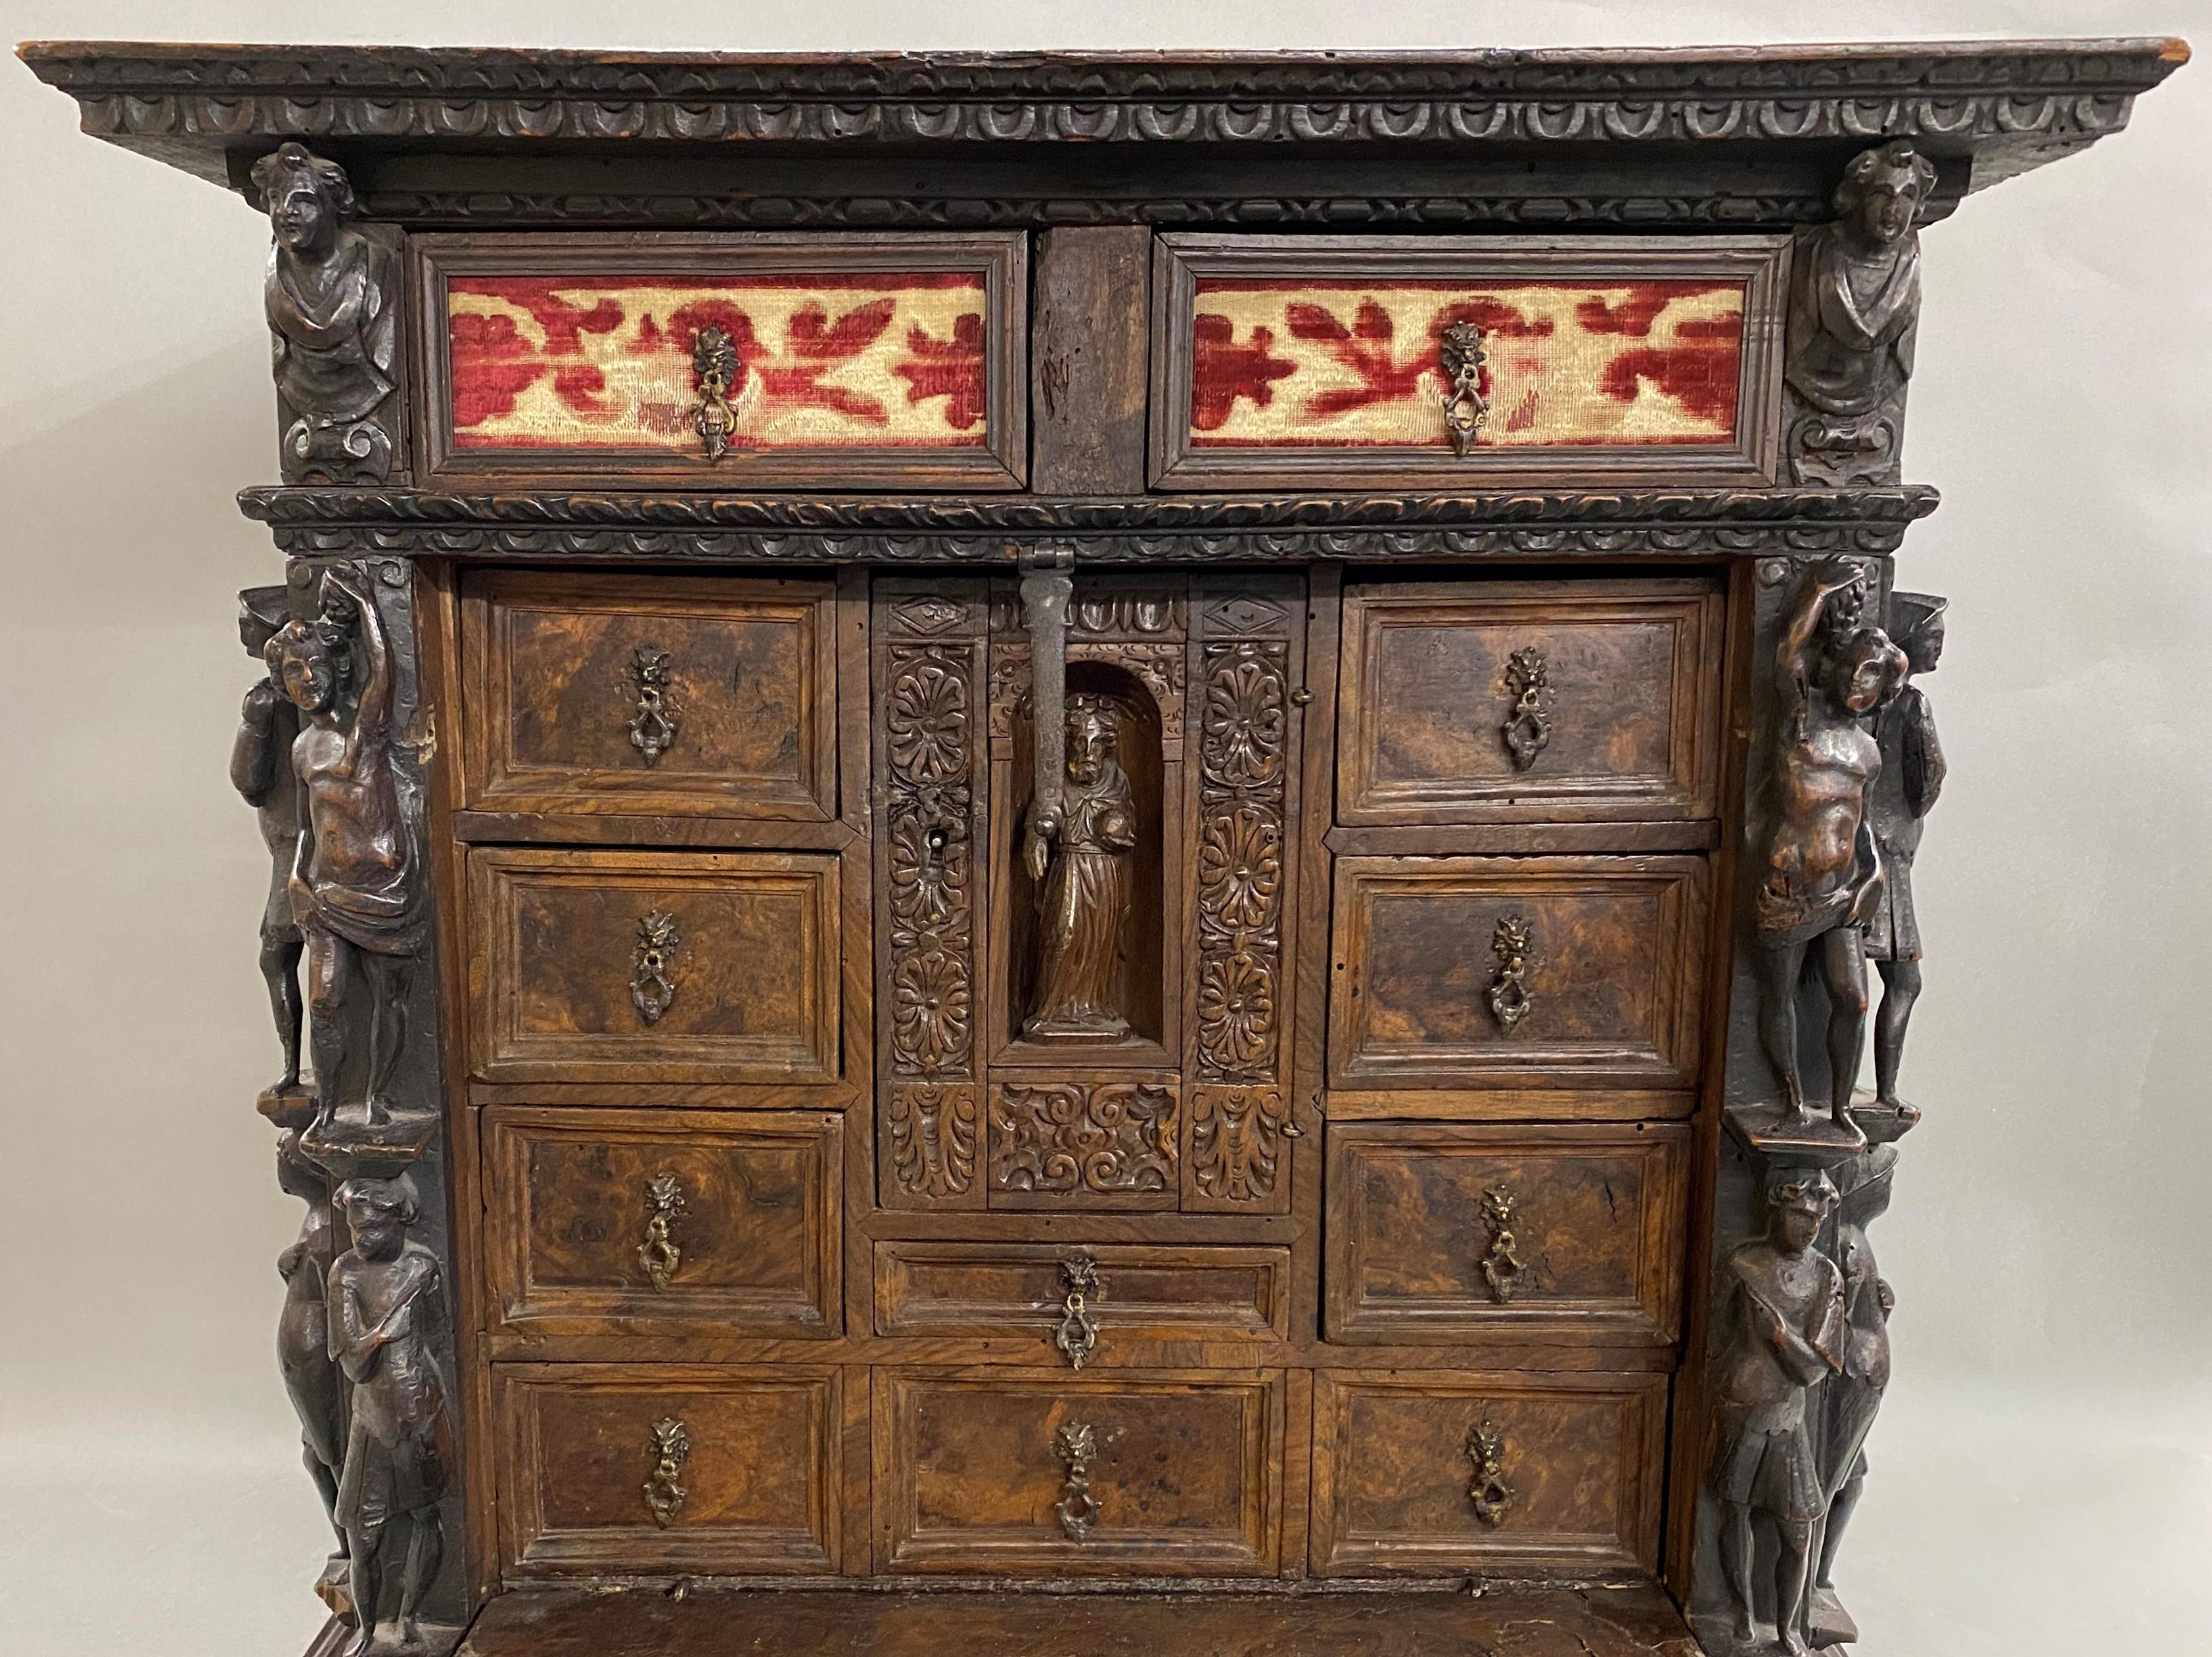 Hand-Woven 17th Century Spanish Burled Walnut Vargueno or Collectors Cabinet For Sale